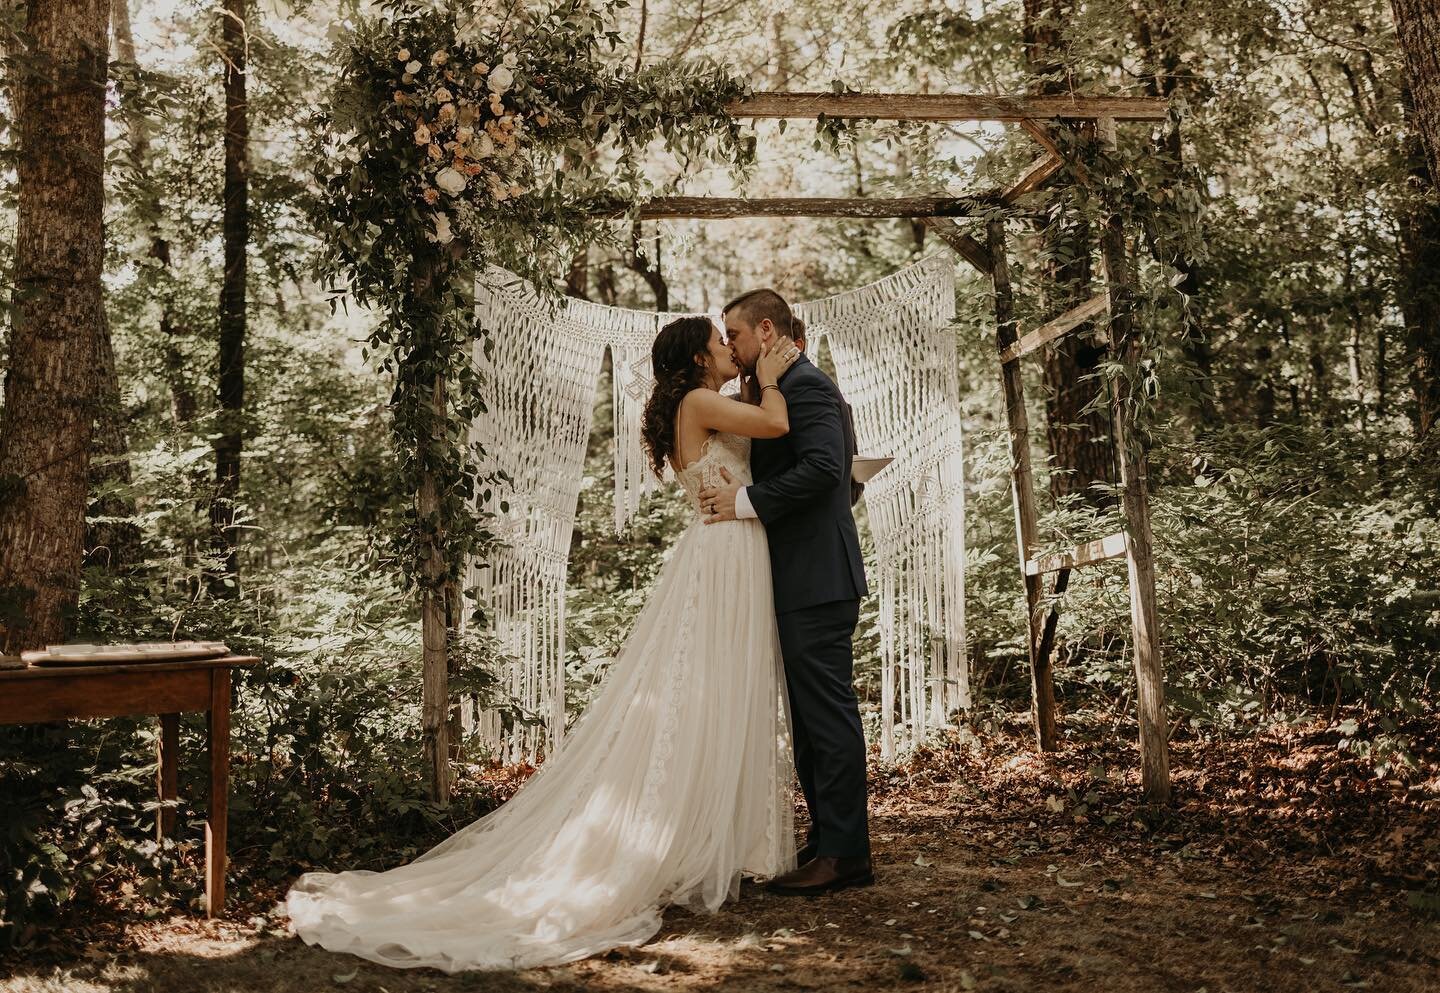 Everything about this day was perfect. Katie &amp; Josh had the most beautiful ceremony in the woods underneath stunning florals. Definitely wedding goals if you ask me.✨🪵🌿🍂